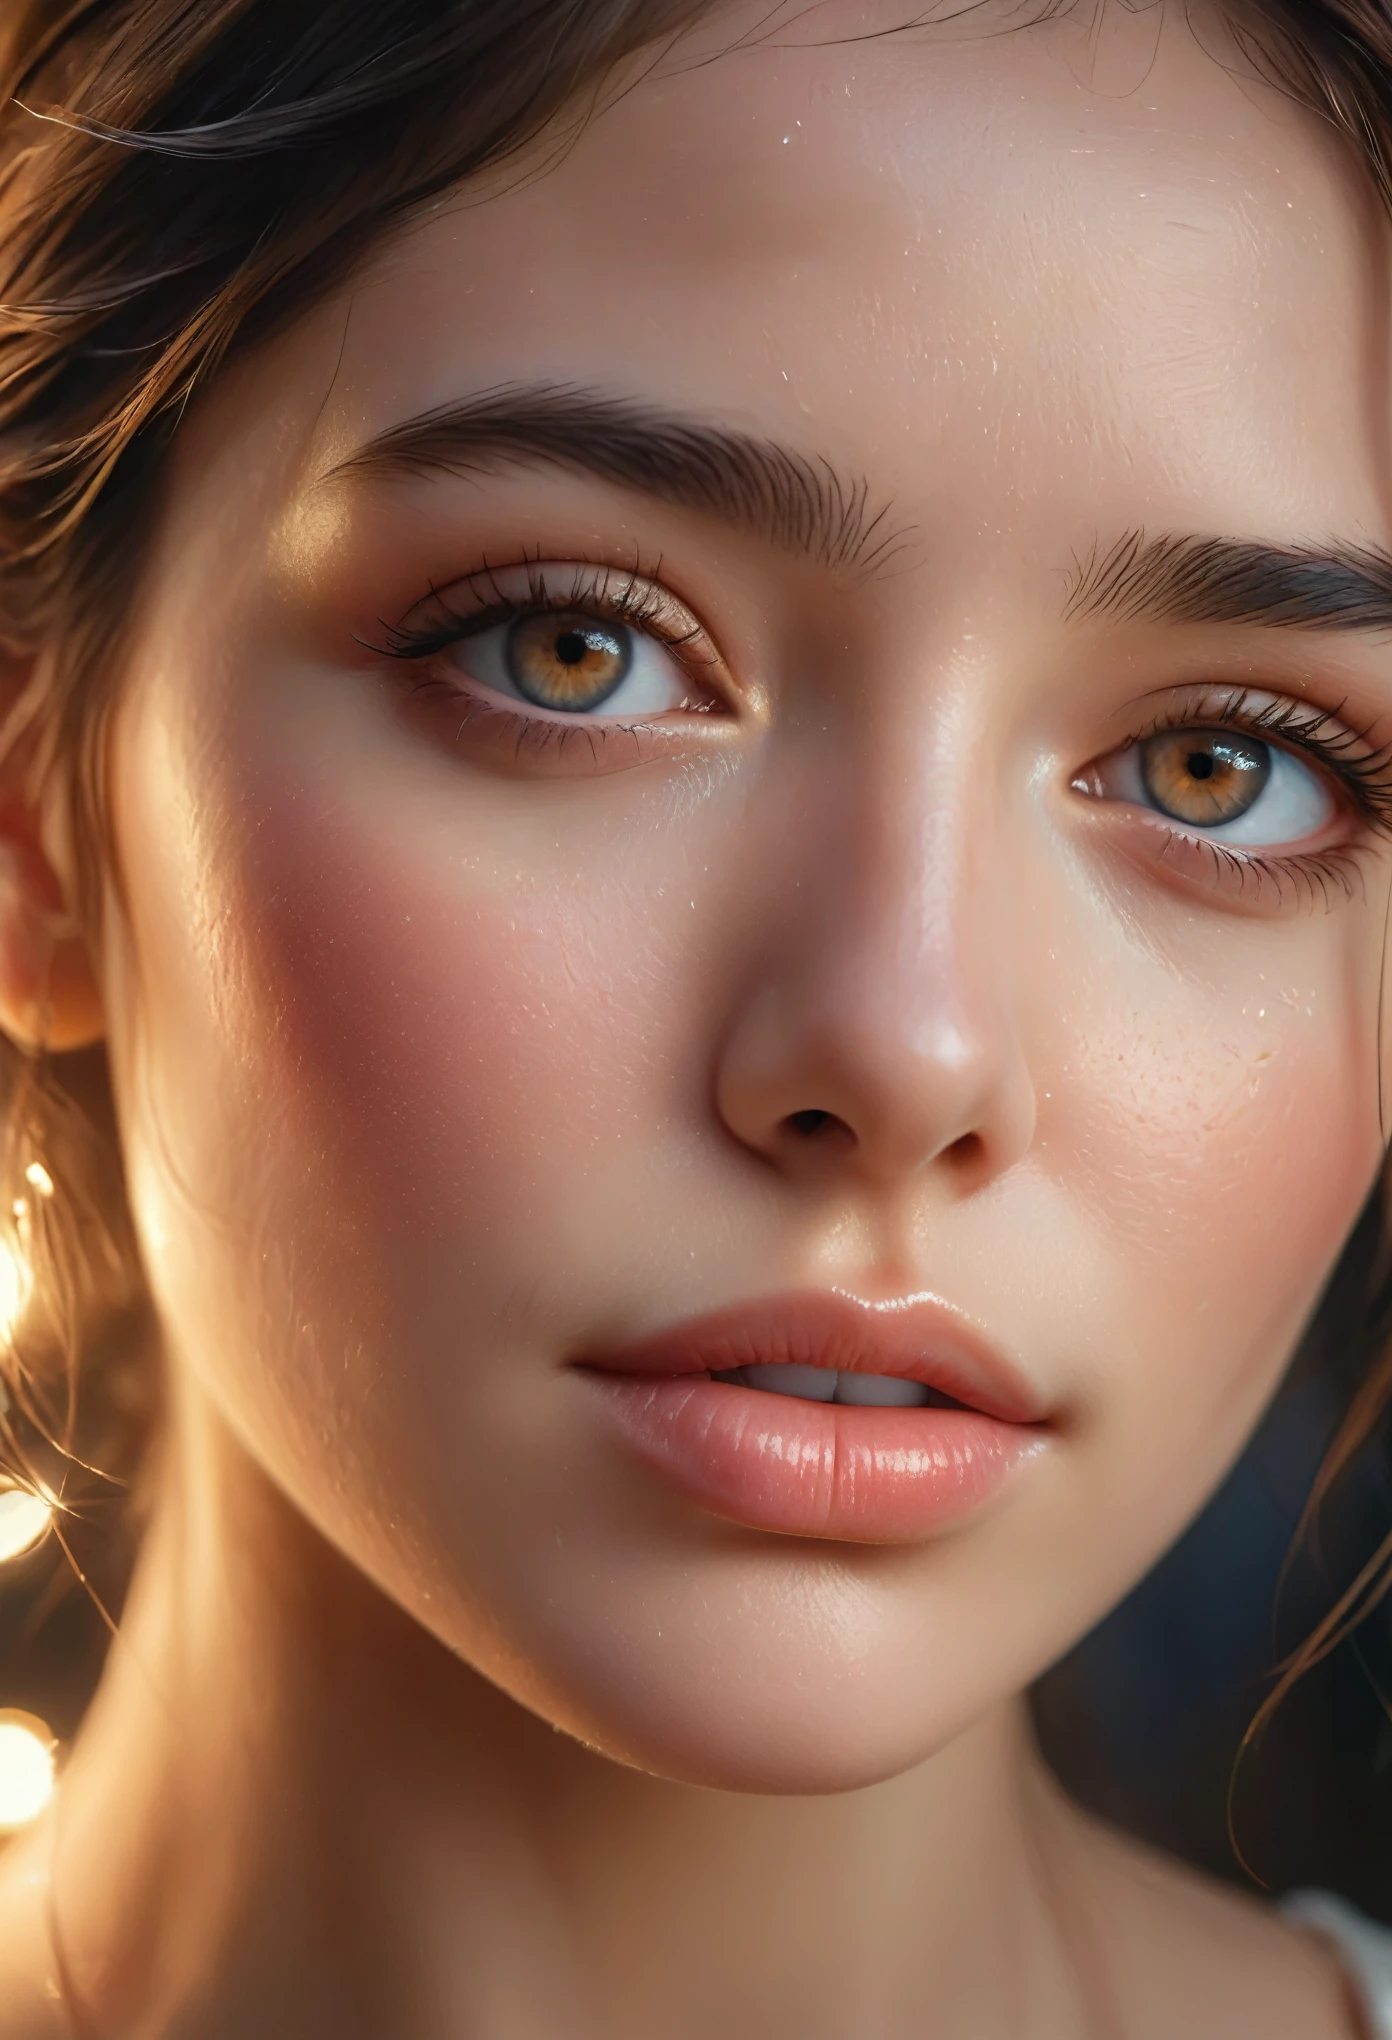 A close-up of a beautiful young woman's face, with a single tear gently rolling down her cheek. Her eyes should be filled with deep emotion, sparkling with unshed tears. Her skin should be smooth and radiant, with detailed textures that enhance the realism. The lighting should be soft and warm, casting a gentle glow that highlights her delicate features and the tear. The background should be softly blurred, keeping the focus entirely on her expressive face. Include subtle details like stray hairs softly framing her face to add to the overall beauty and emotion of the scene.,(masterpiece:1.3),(highest quality:1.4),(ultra detailed:1.5),High resolution,extremely detailed,unity 8k wallpaper,